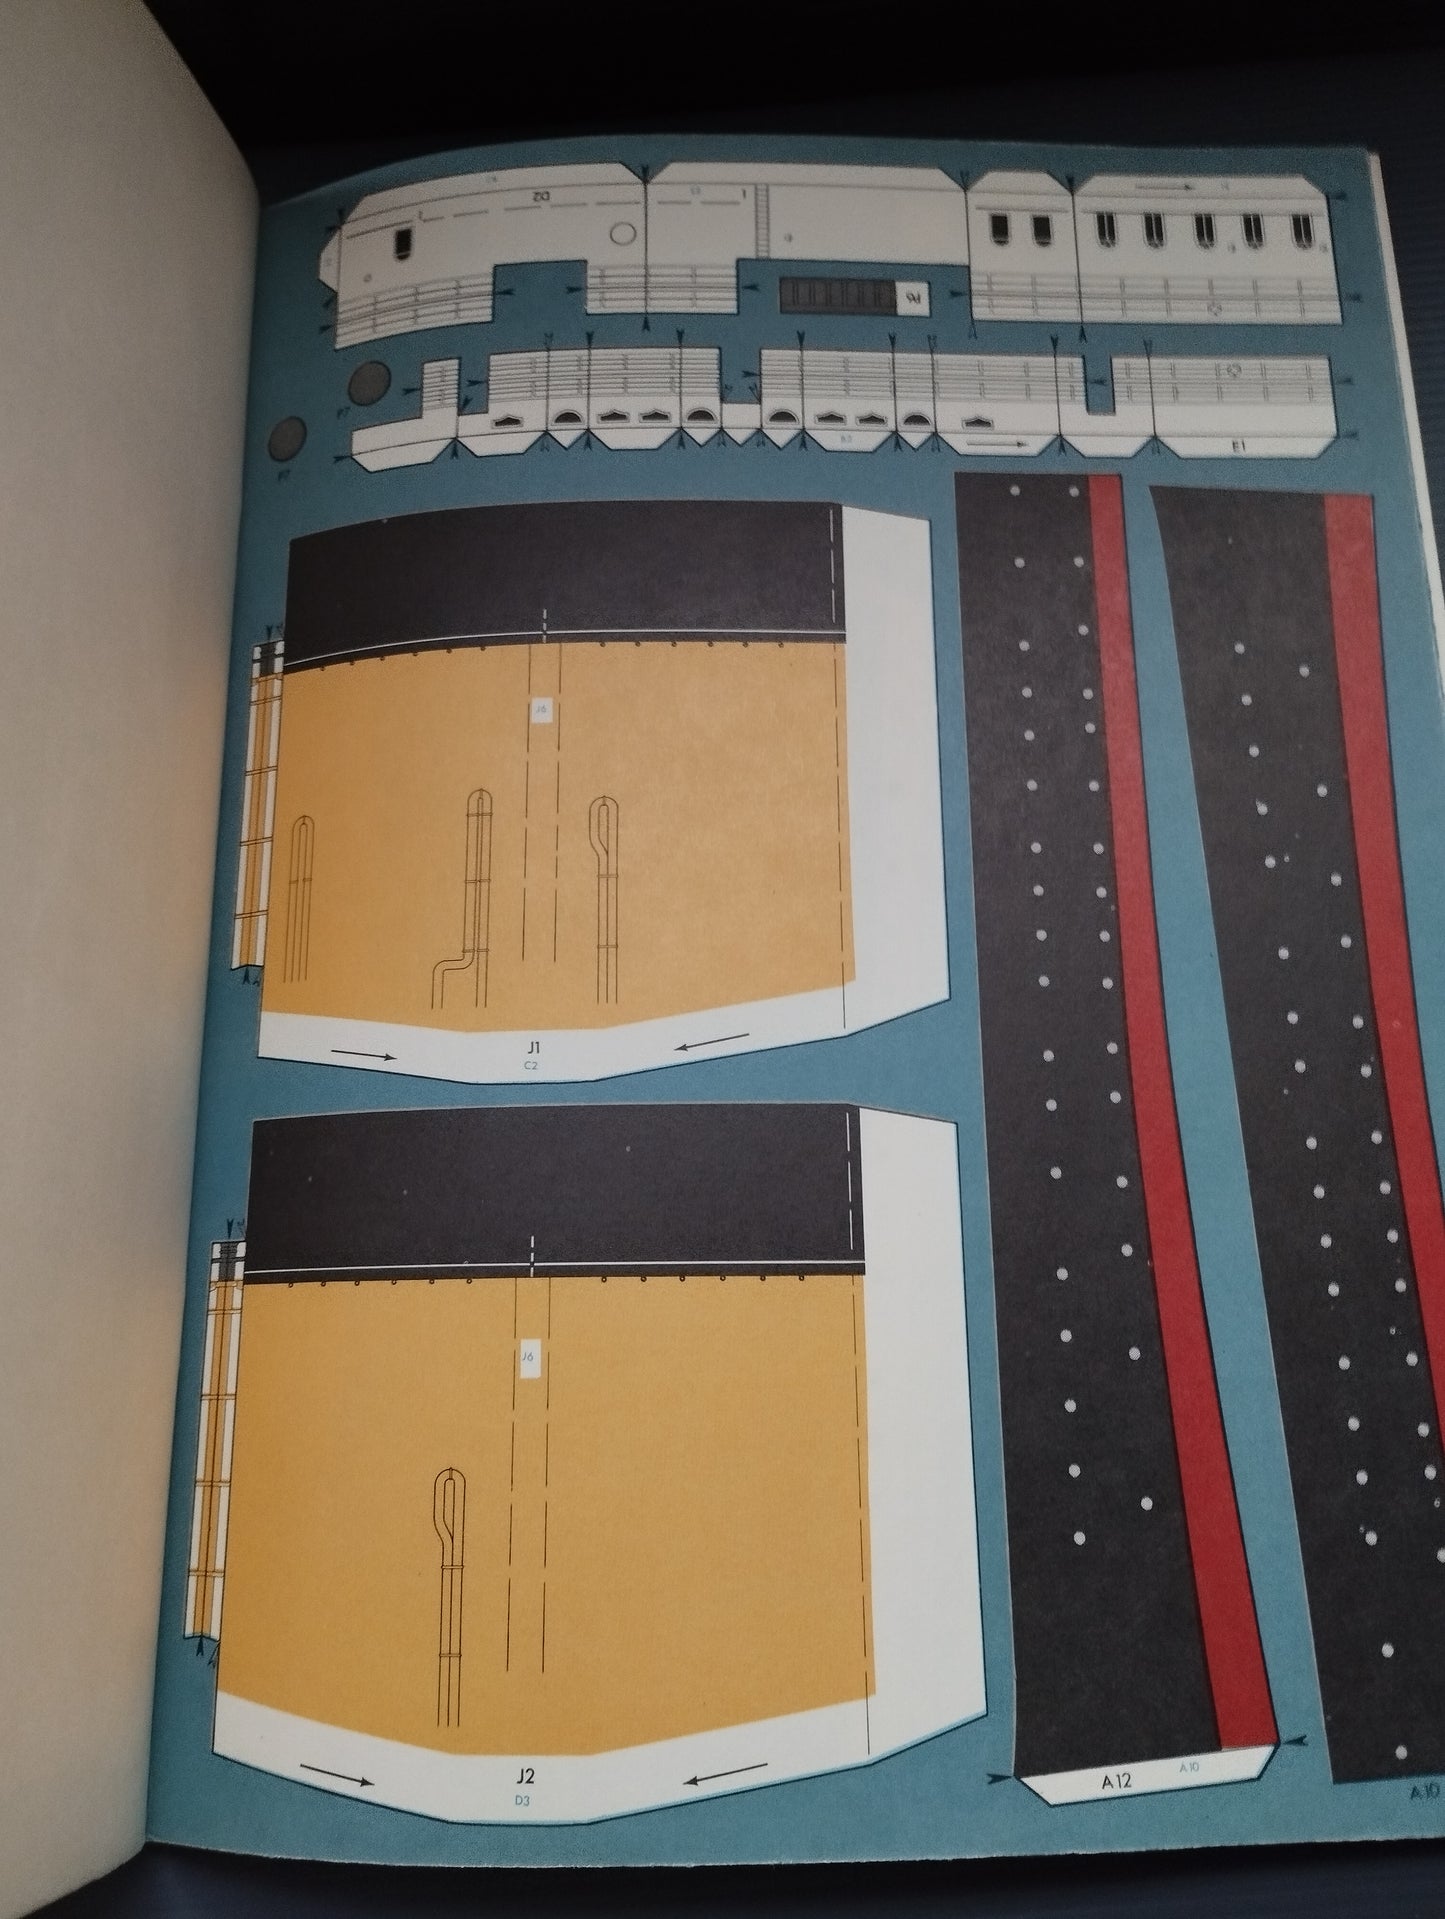 Titanic Alan Rose model book

 Published in 1981 by Perigee Books